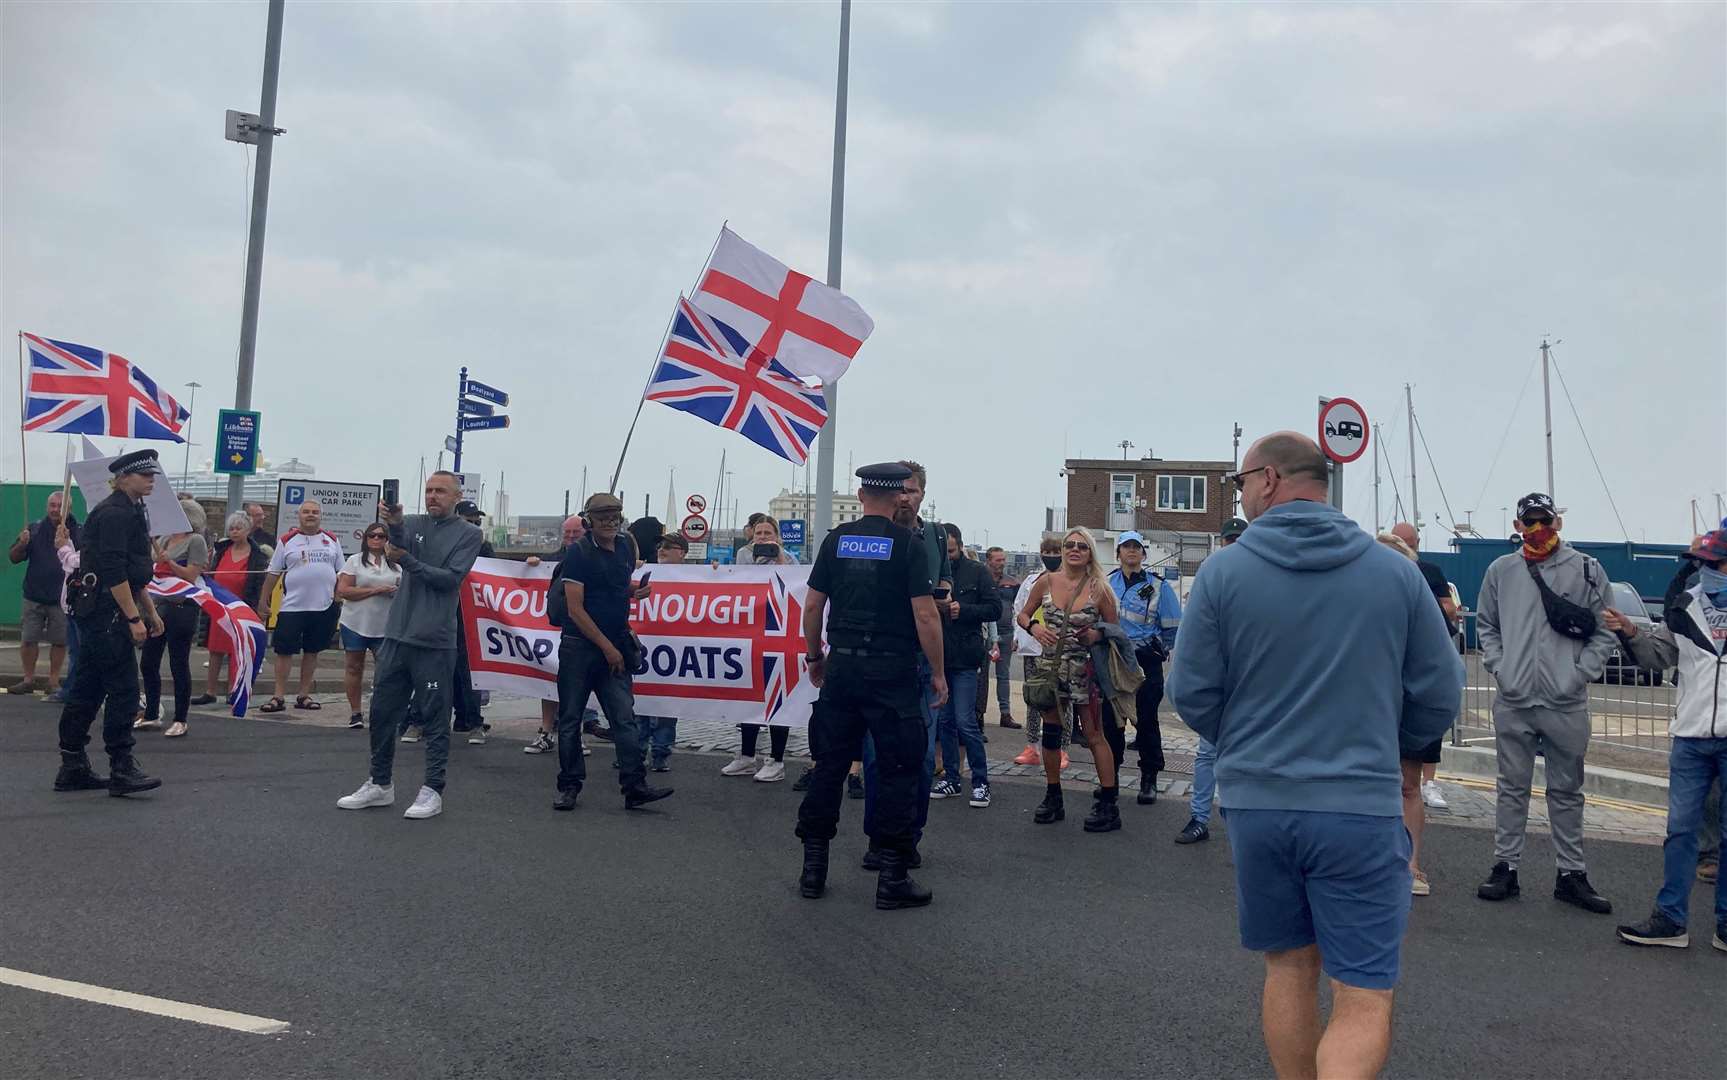 Anti-immigration protesters were calling for the RNLI to stop ‘acting as a taxi service’ for asylum seekers